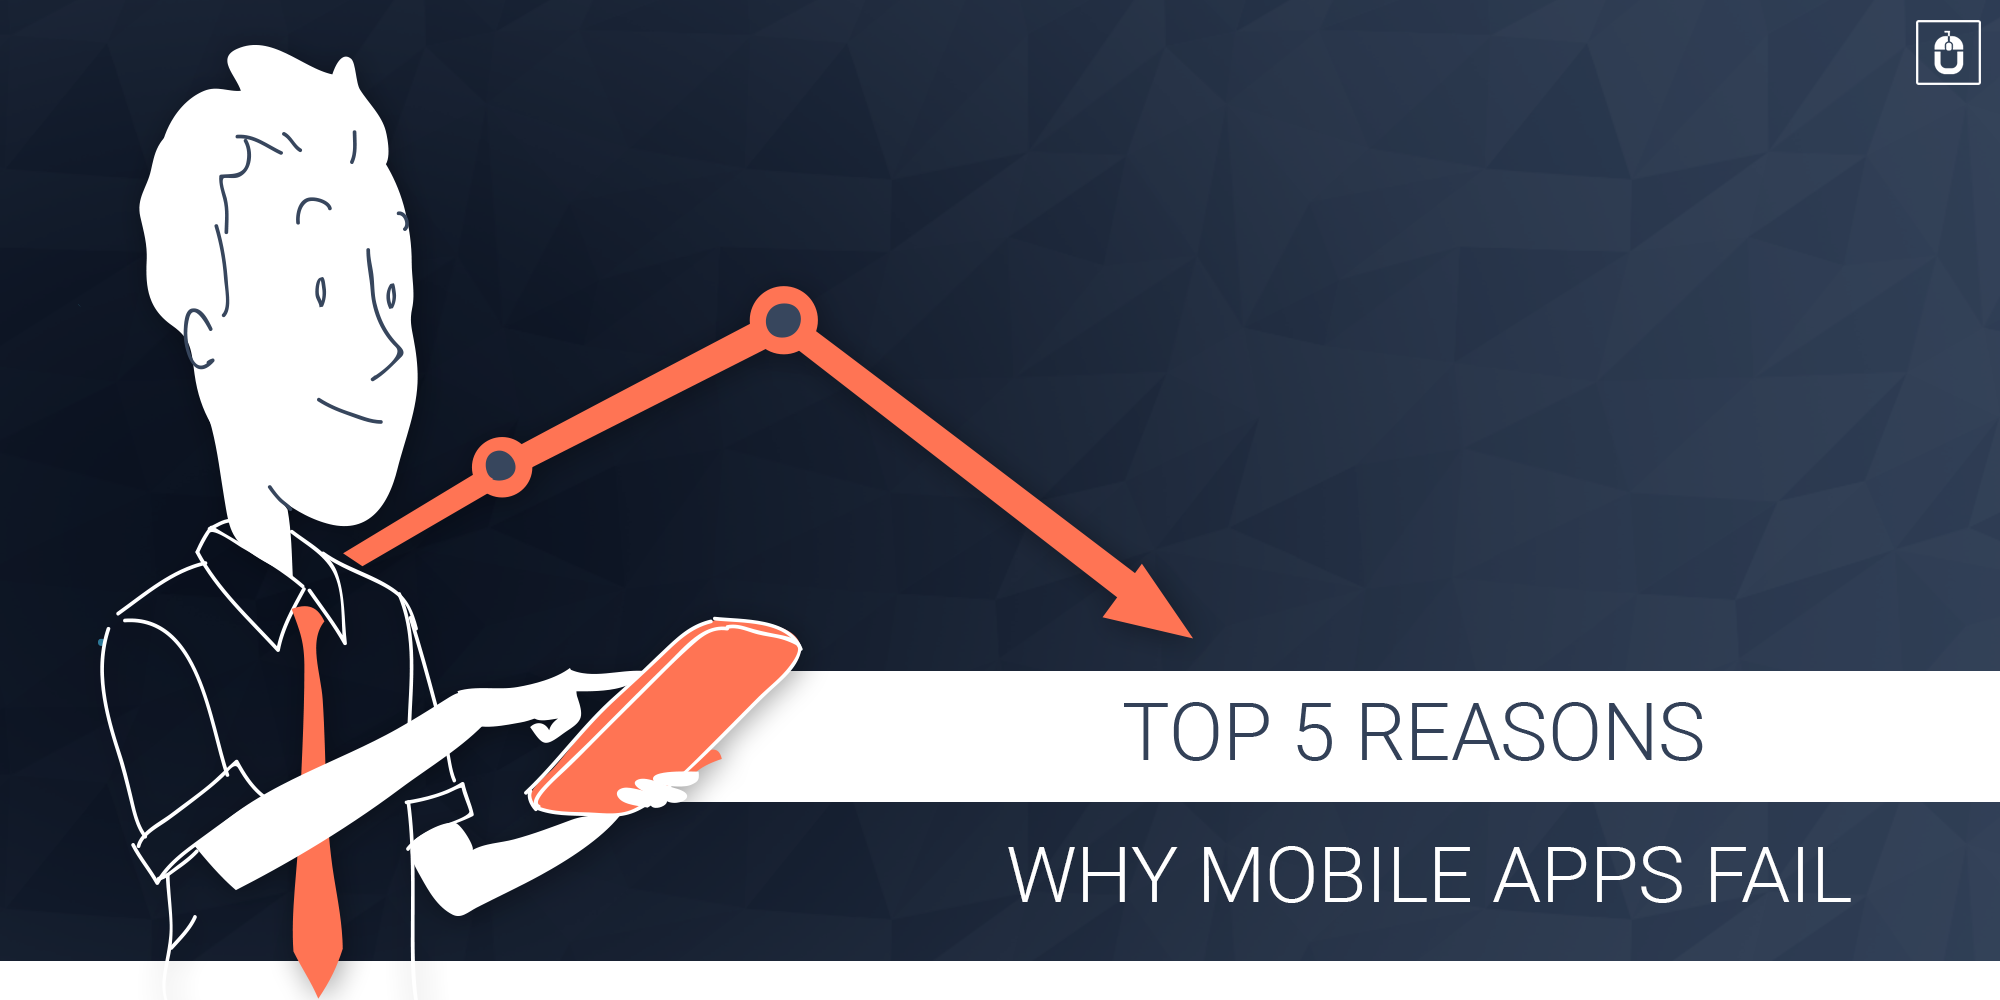 TOP 5 REASONS WHY MOBILE APPS FAIL